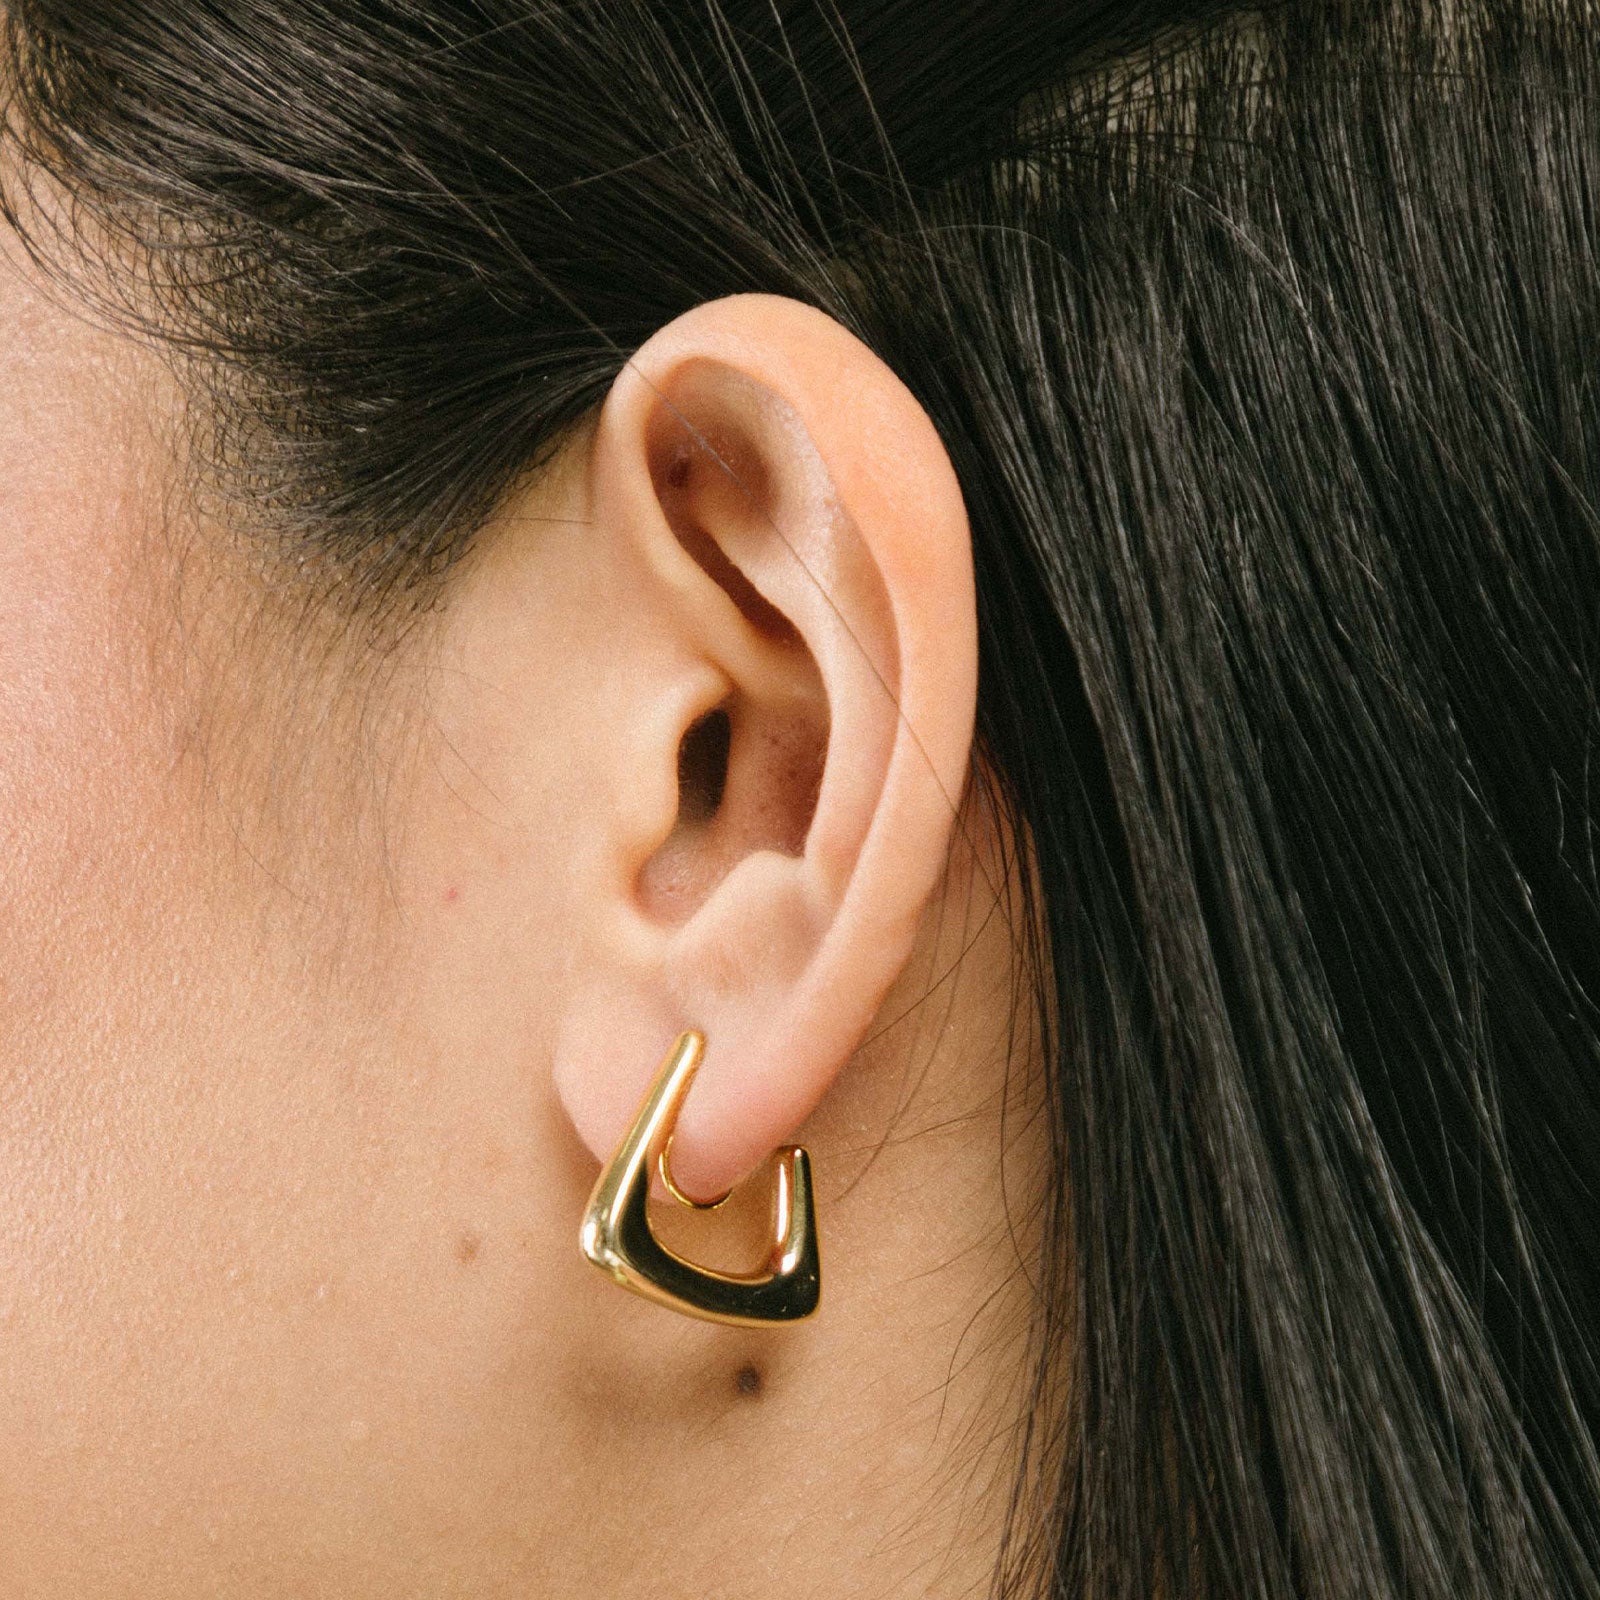 A model wearing our Triangle Hoop Clip-On Earrings - 18k gold-plated metal alloy, non-tarnish, and water-resistant. Modern clip-on with mosquito coil closure for secure wear. Classic triangle hoop shape for a stylish look, perfect for everyday wear.